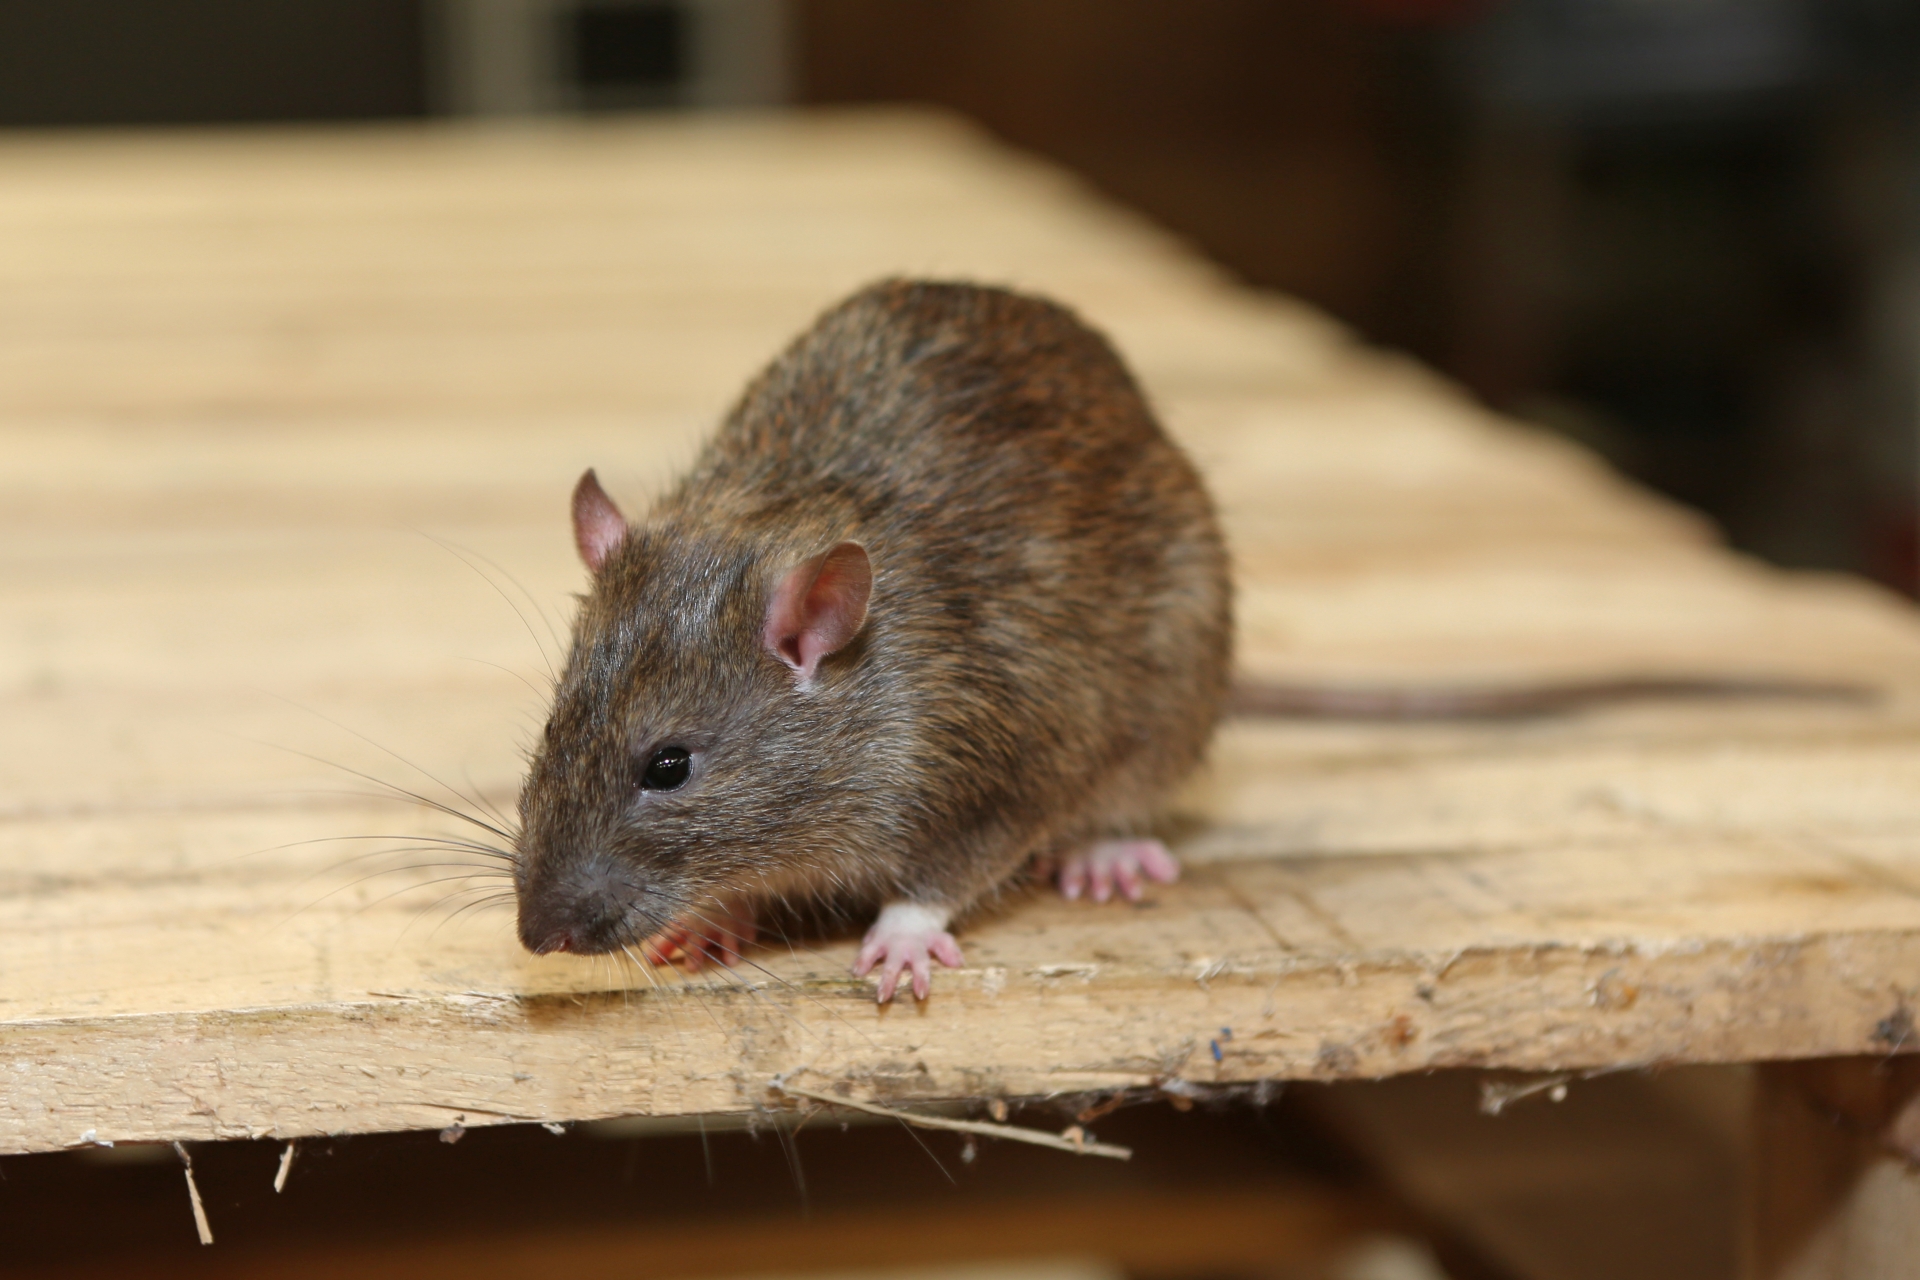 Rat Control, Pest Control in Garston, Leavesden, WD25. Call Now 020 8166 9746